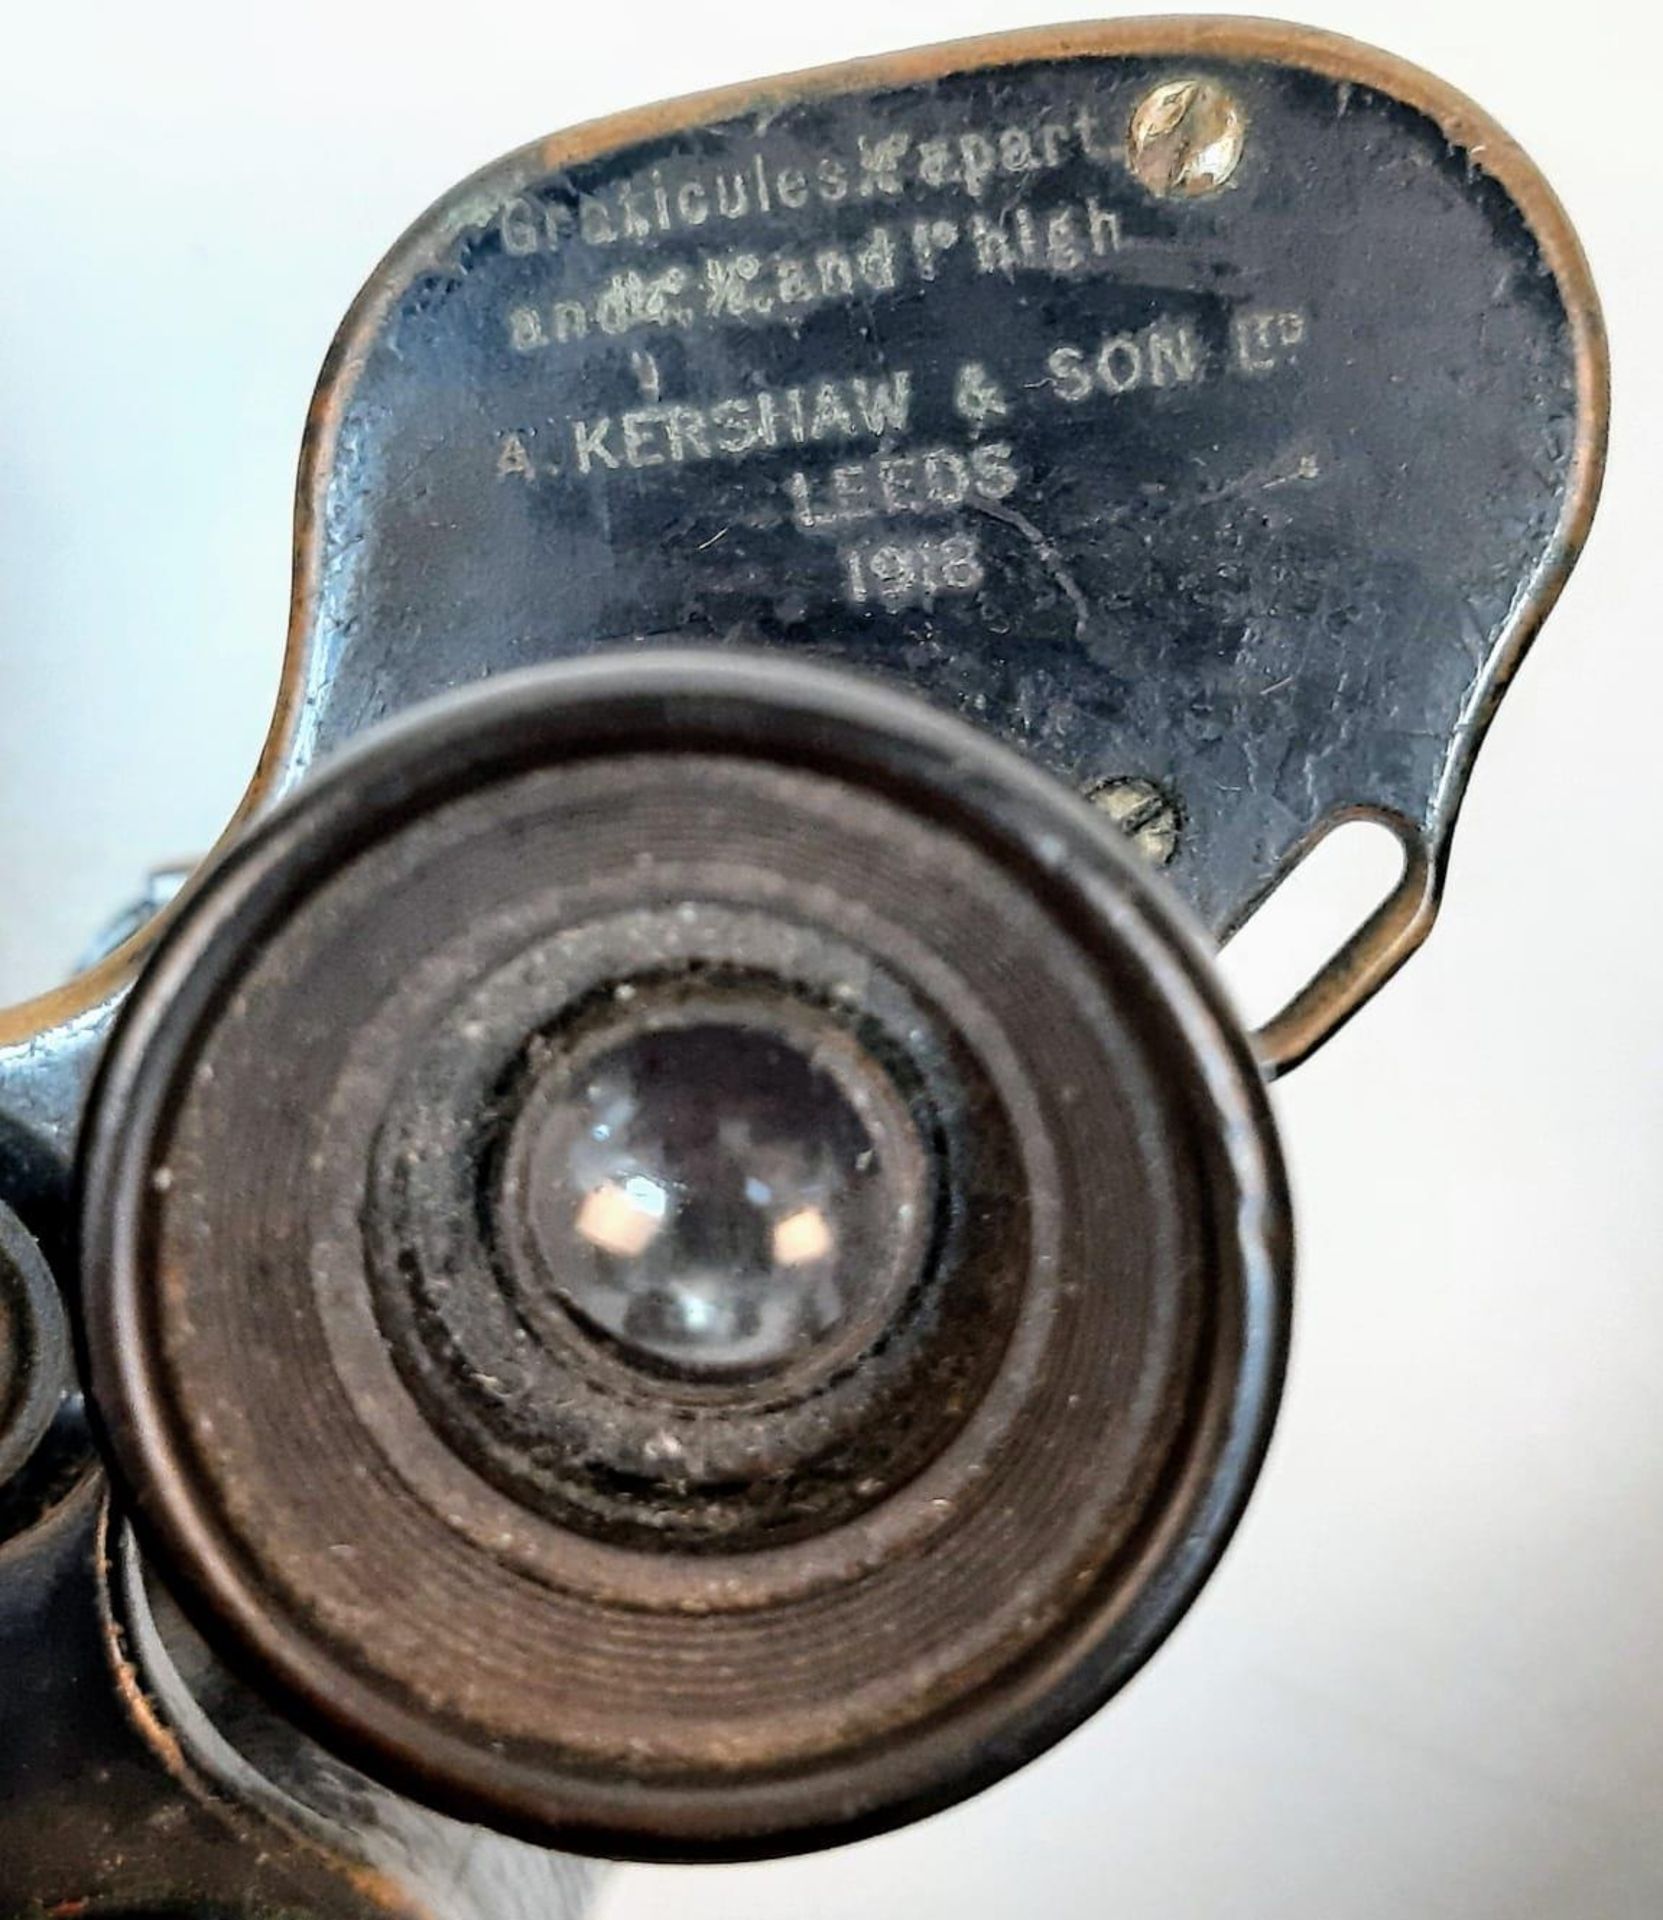 An original, pair of WW1, British Forces, Binoculars made in 1918 by A. KERSHAW in Leeds. In - Image 6 of 7